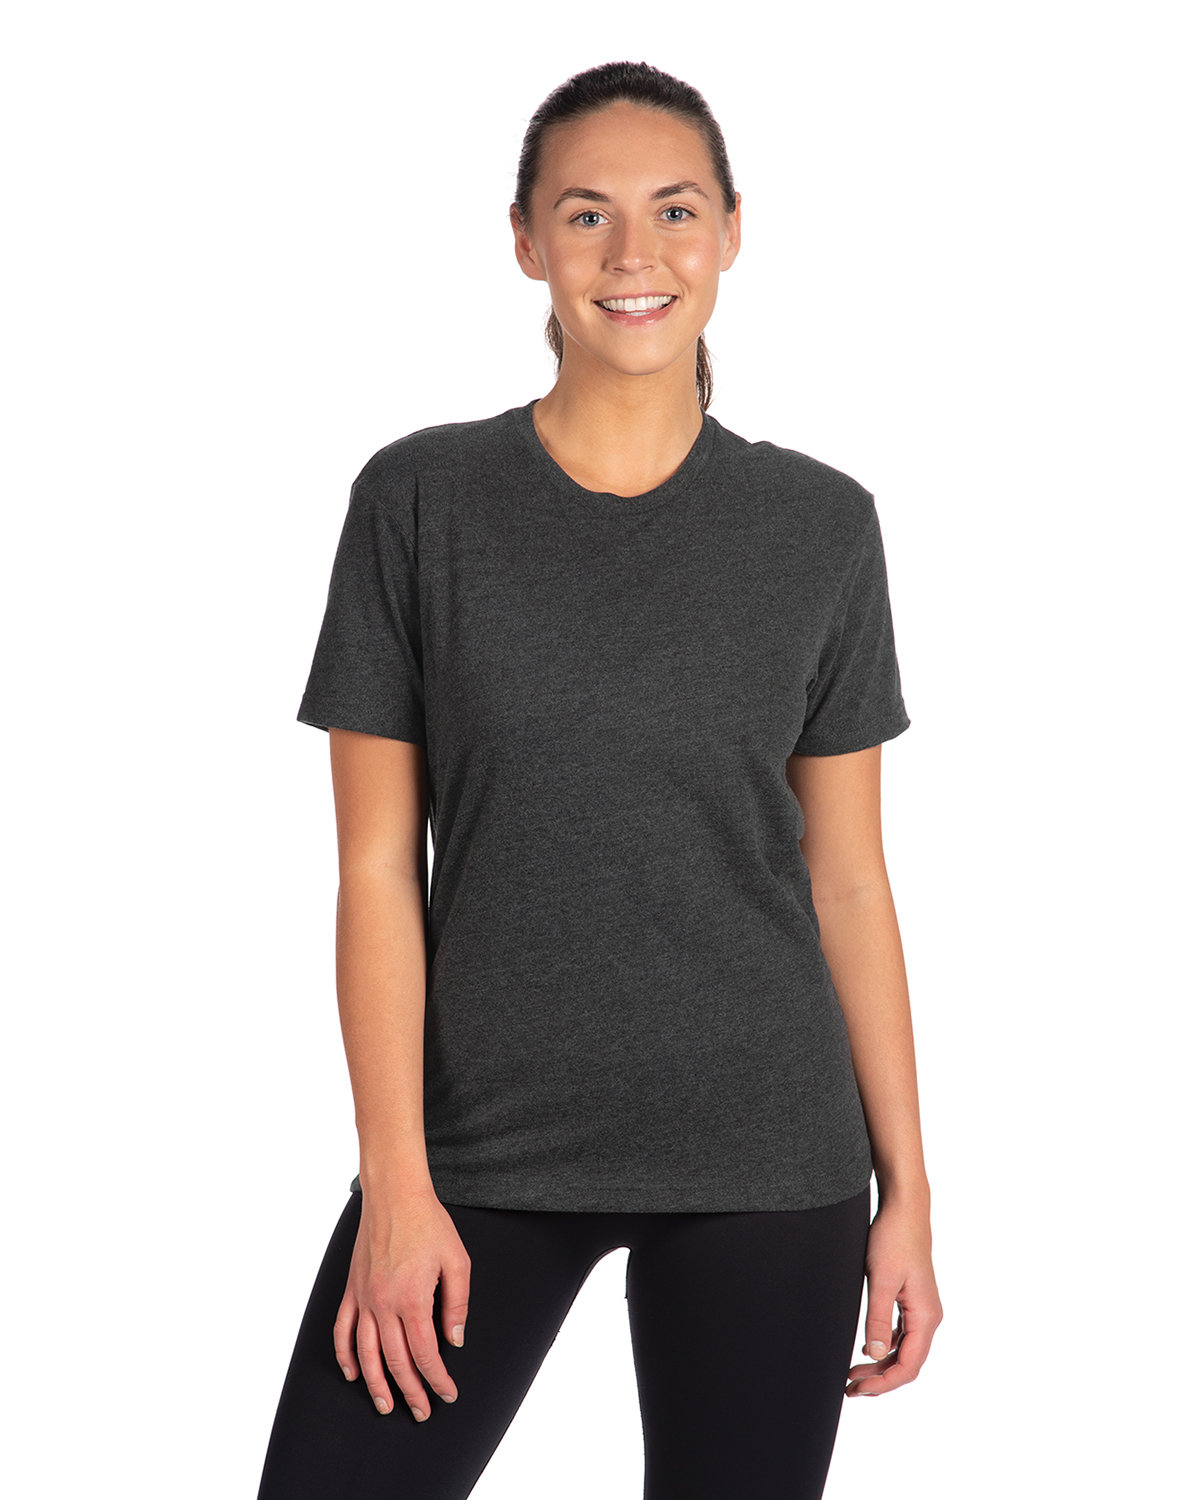 Next Level Apparel Men's Sueded Crew HEATHER CHARCOAL 